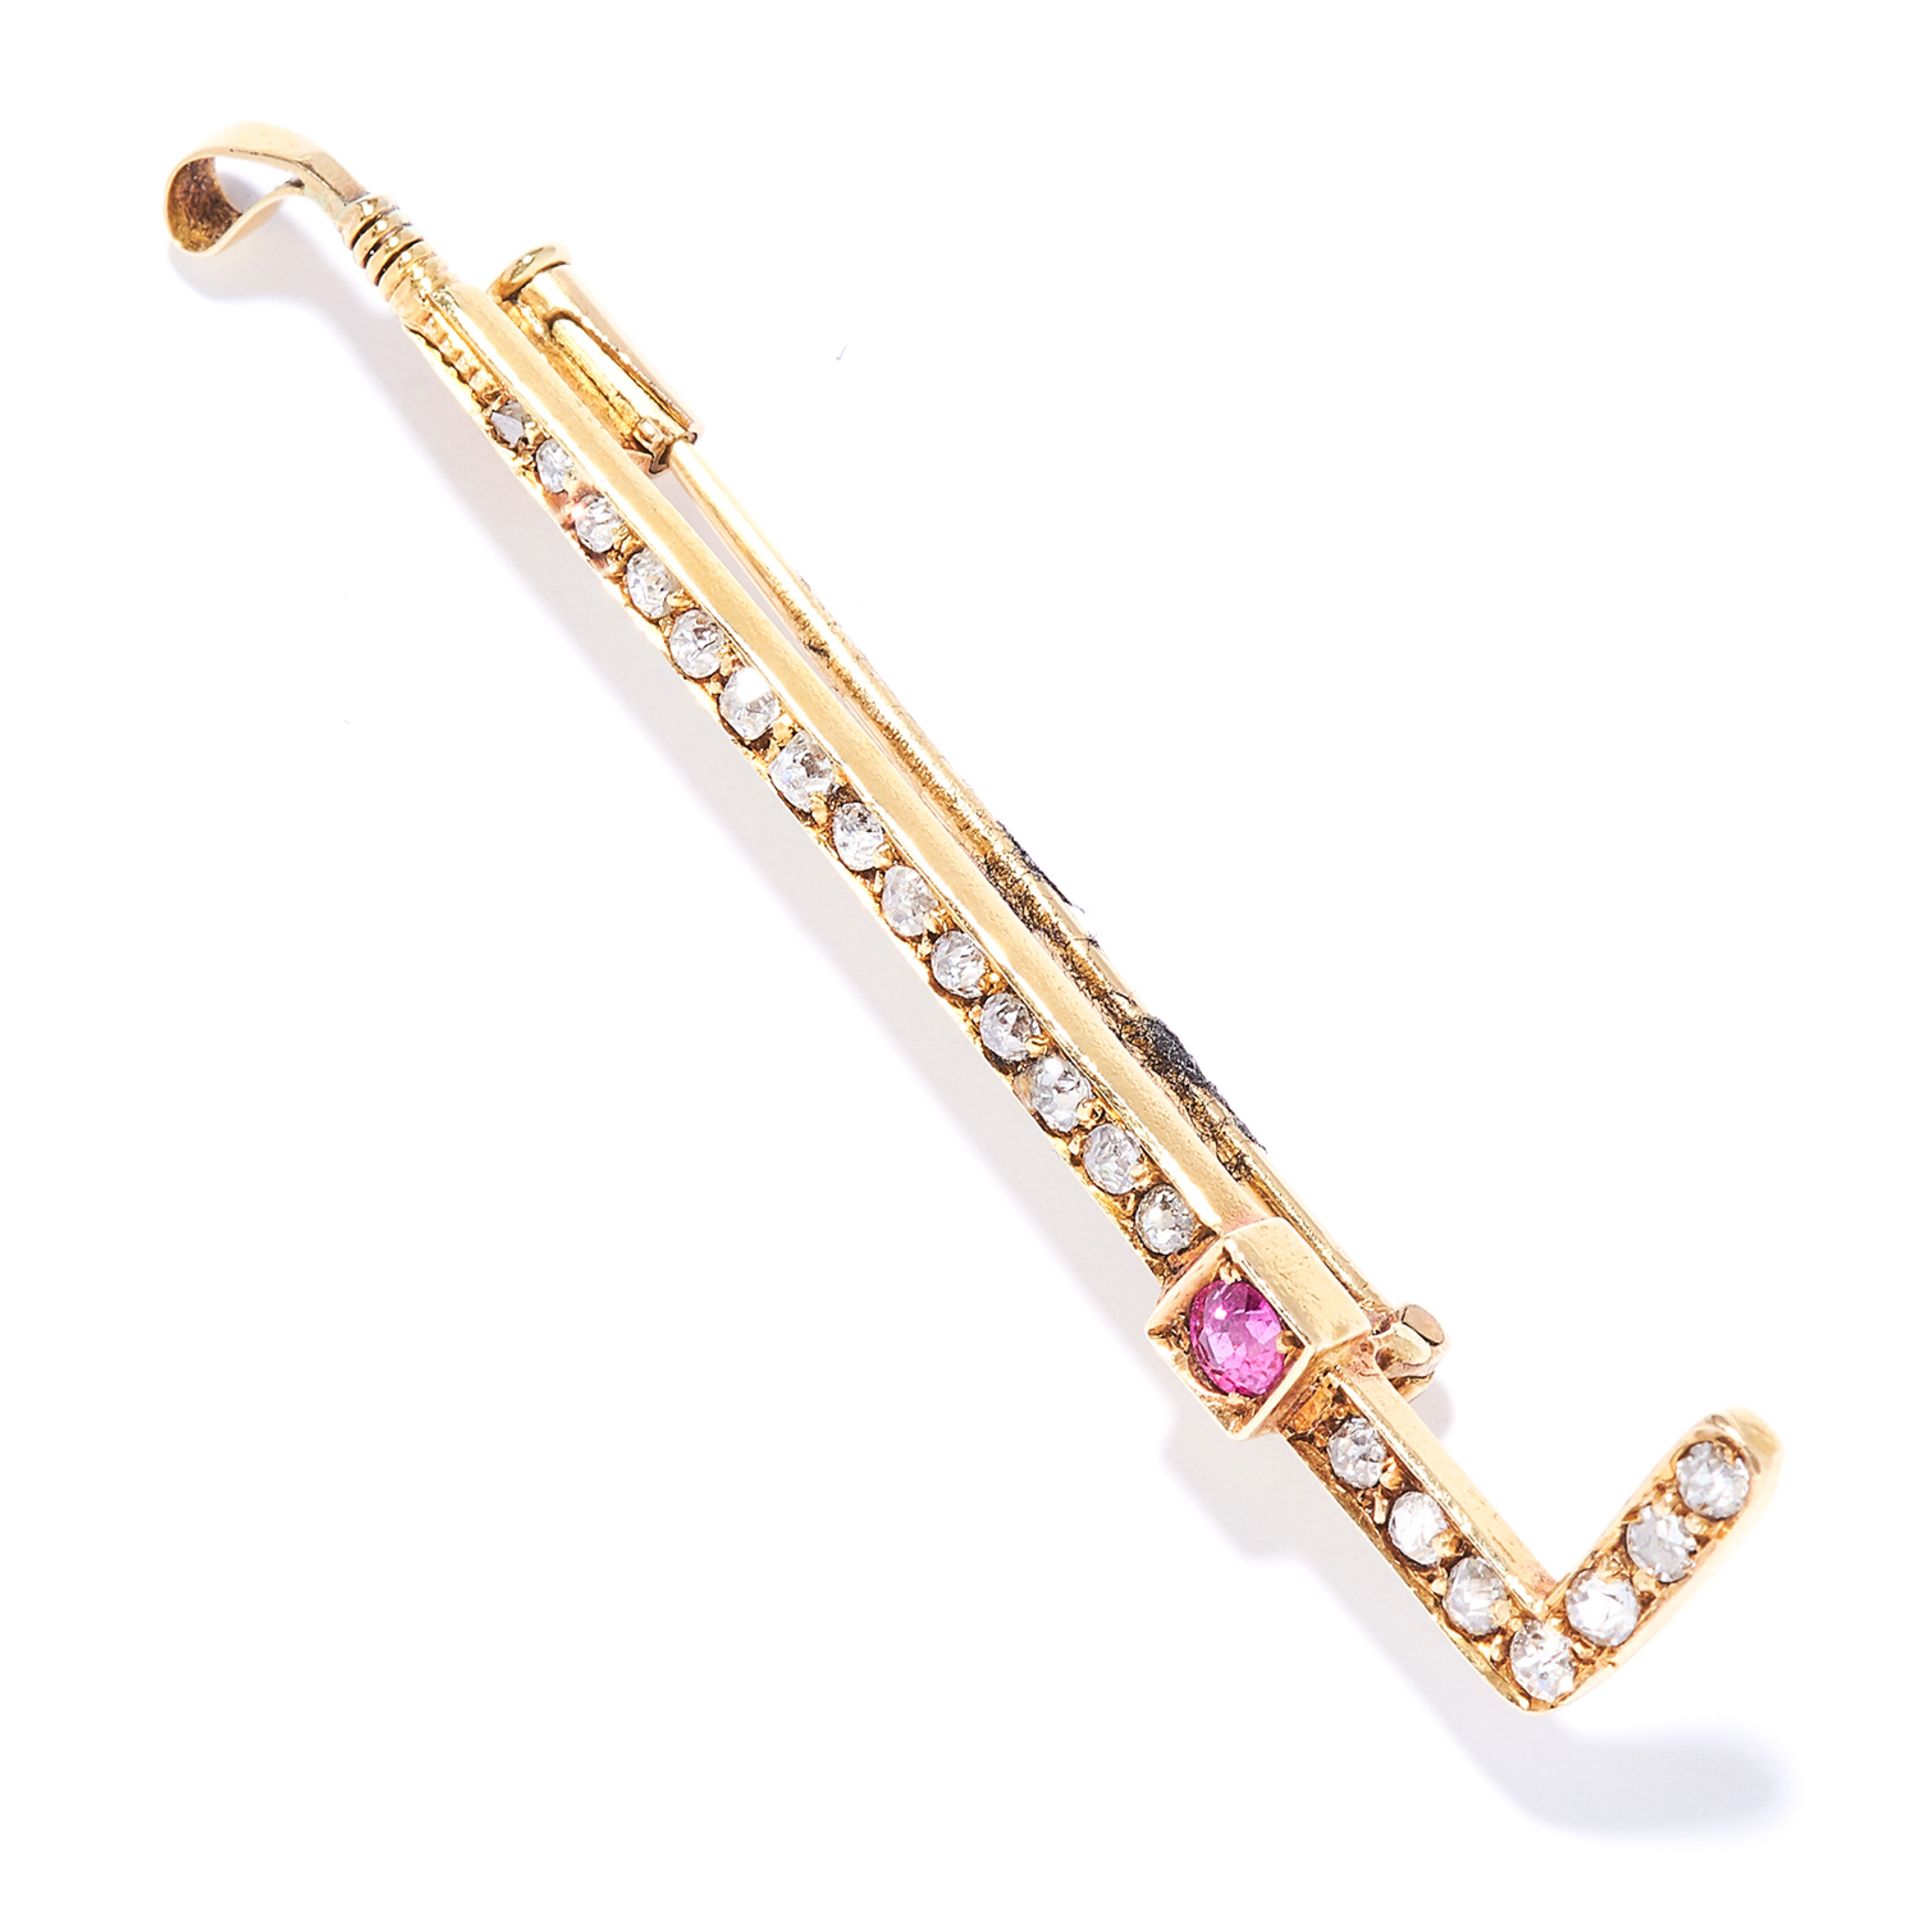 ANTIQUE NOVELTY DIAMOND AND RUBY POLO STICK BROOCH, FRENCH in high carat yellow gold, depicting a